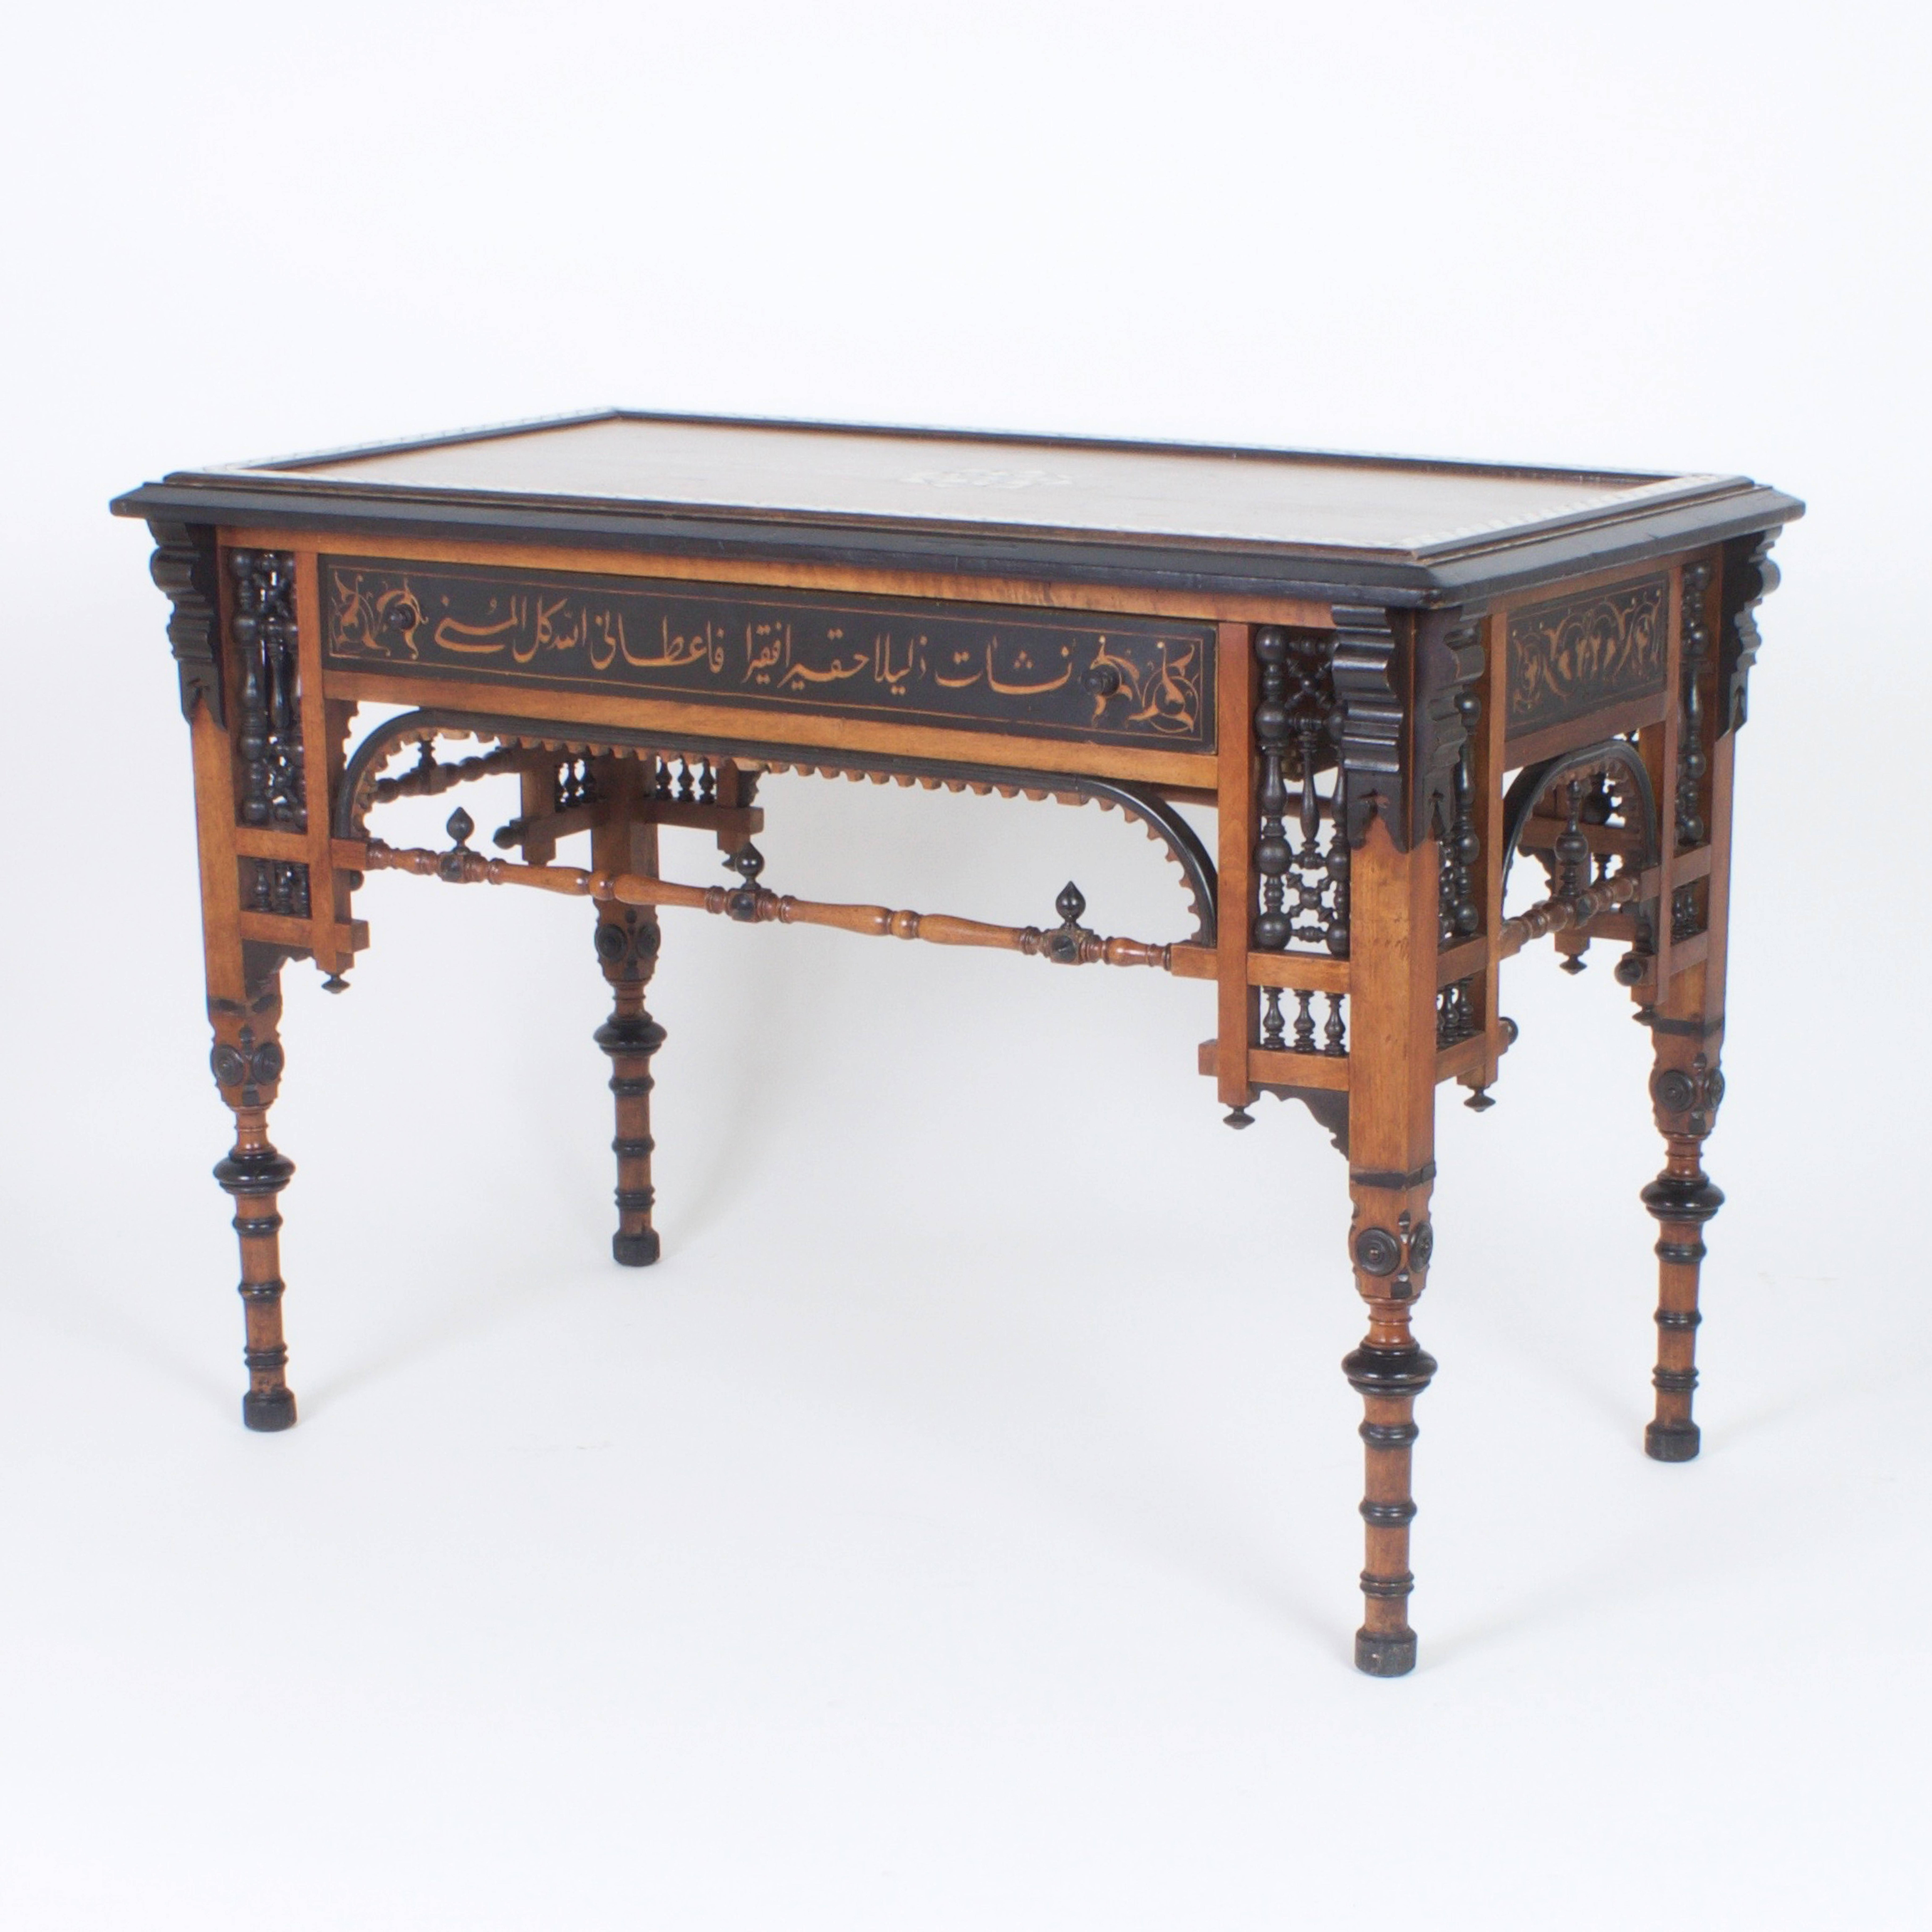 Intriguing aesthetics movement one-drawer table or desk with obvious influences of Bugatti and the orientalists. Probably constructed in France with walnut, ebony, and mother-of-pearl. Featuring stick and ball panels, Moorish finials, ribbon corners